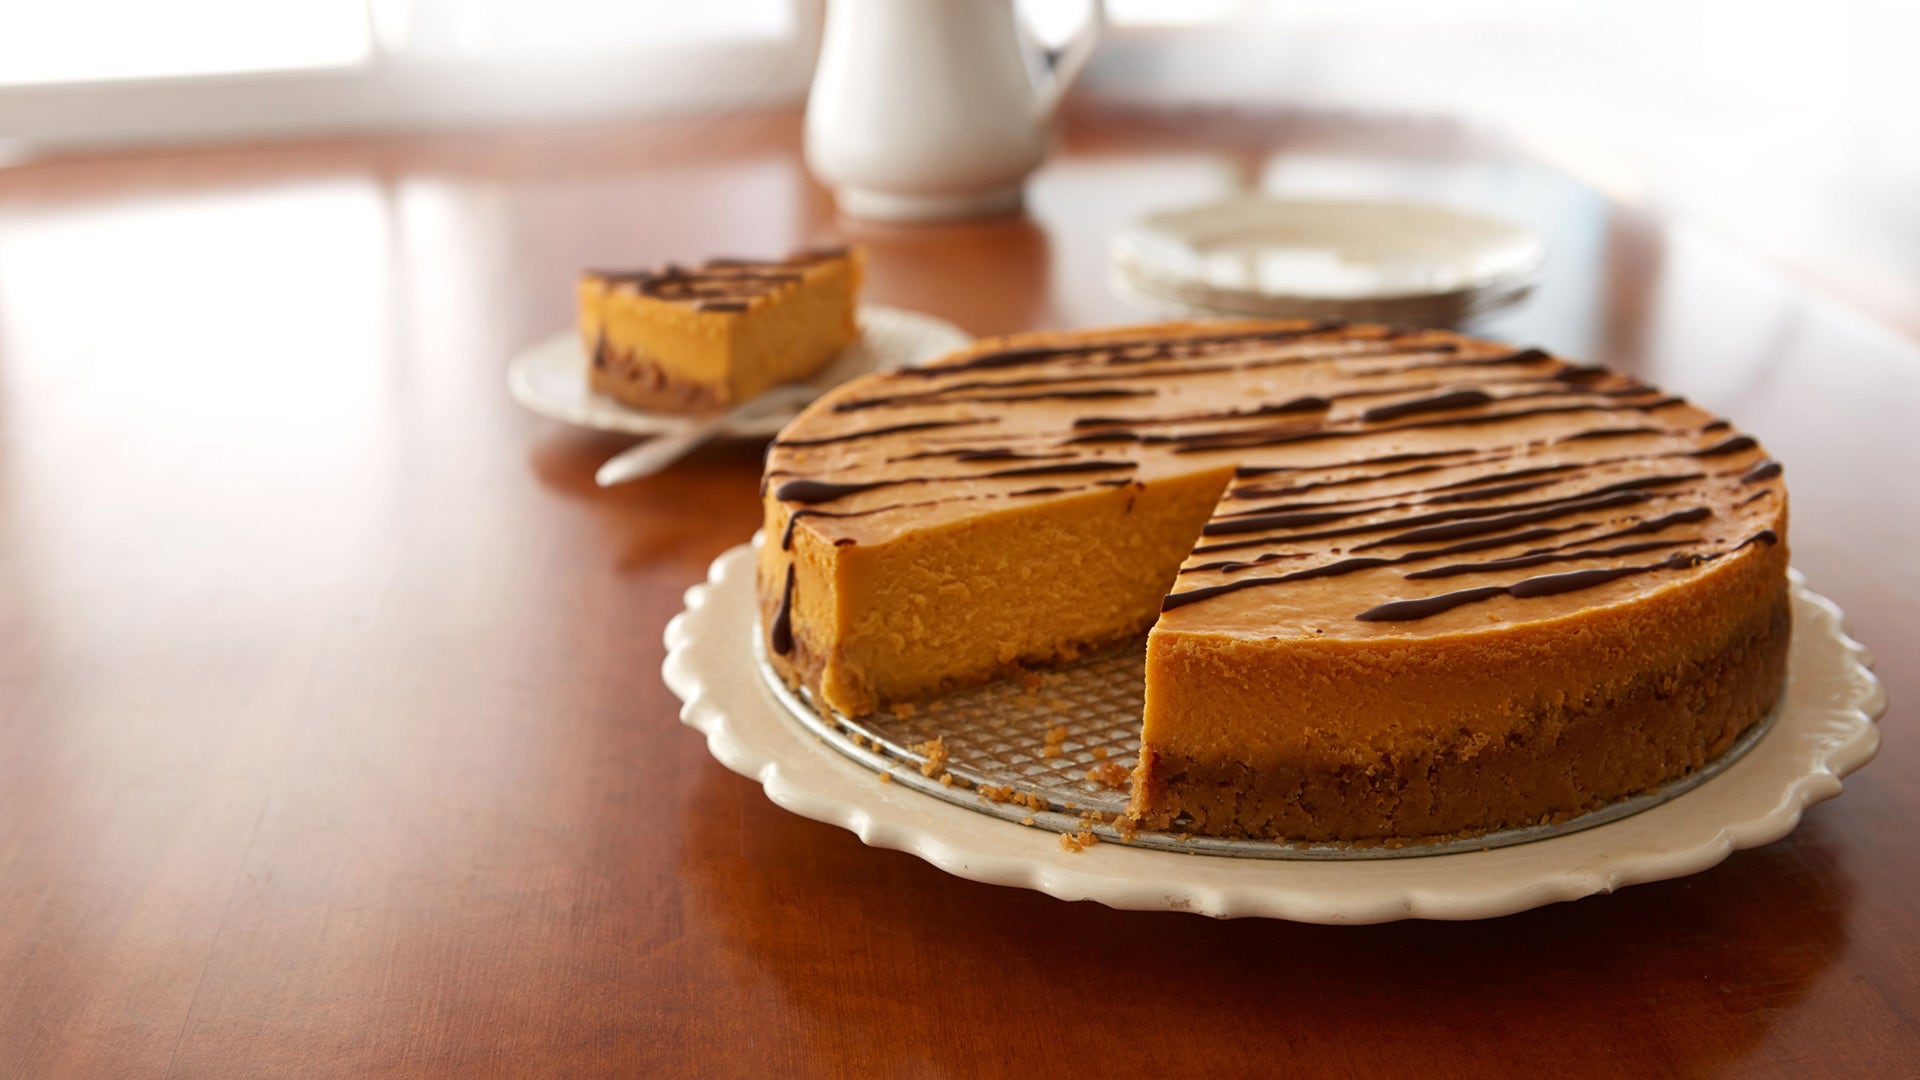 butterscotch cheesecake with chocolate drizzle